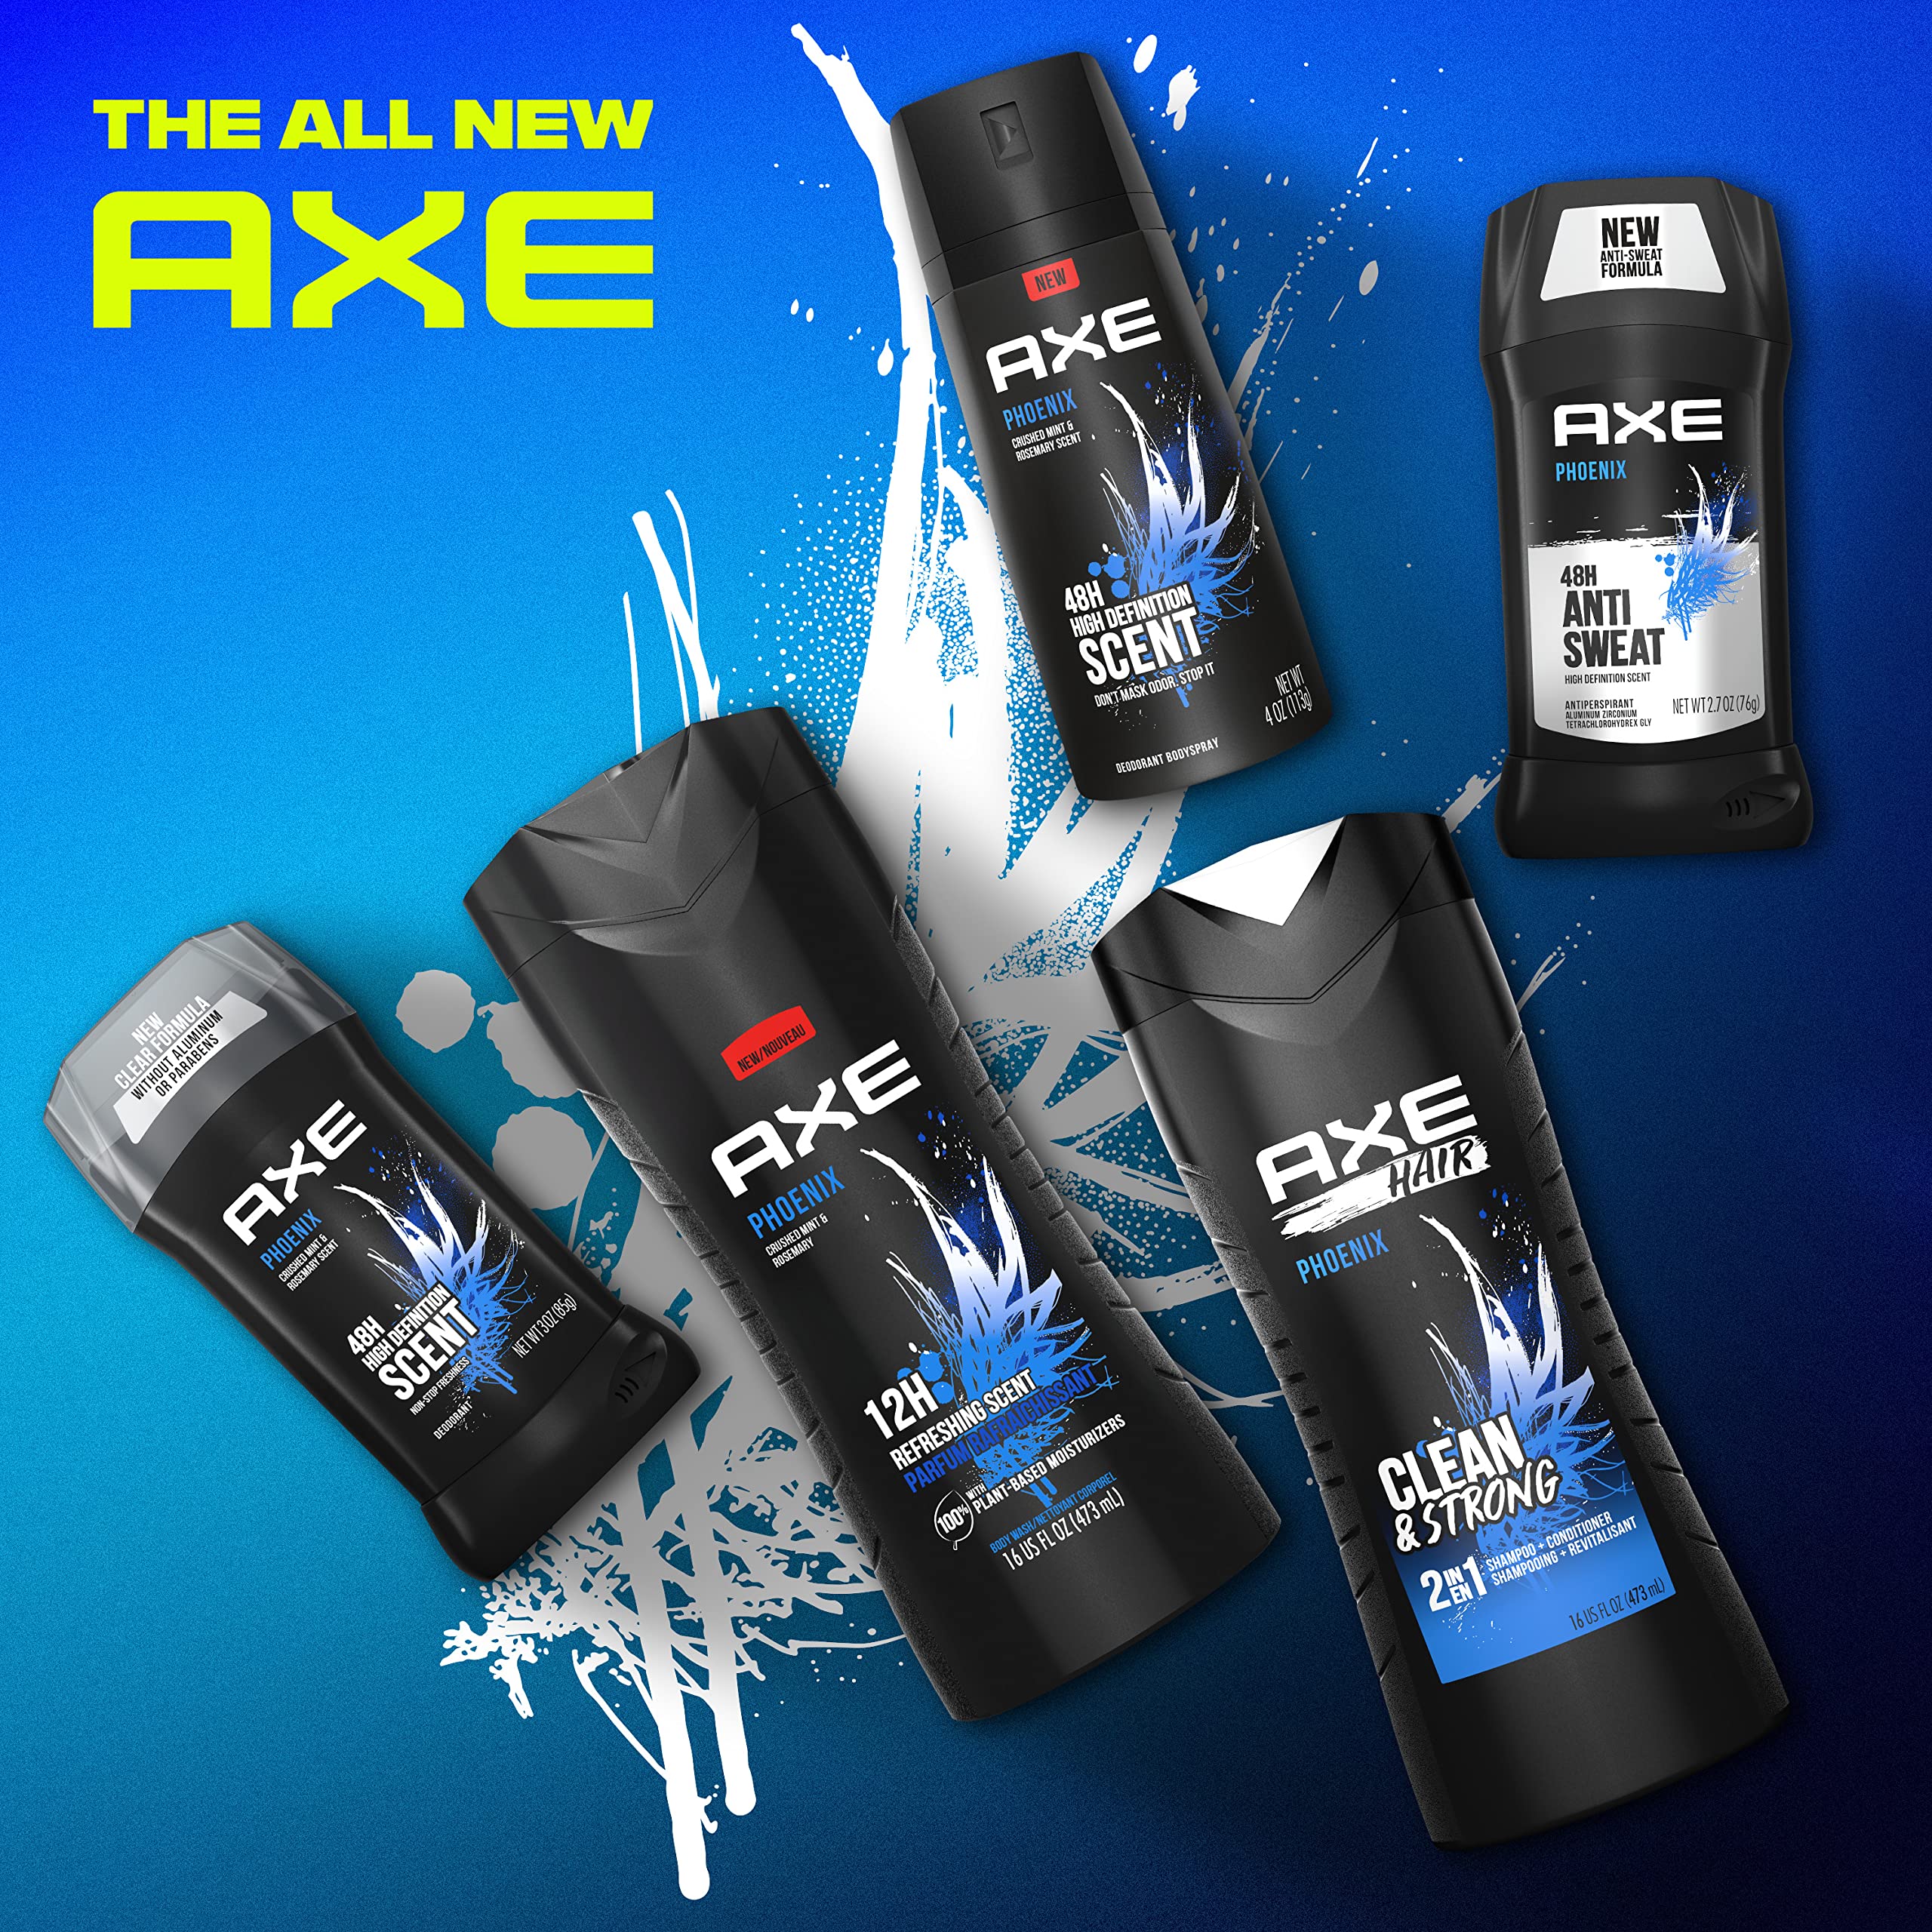 AXE Body Wash 12h Refreshing Scent Phoenix Crushed Mint & Rosemary Men's Body Wash With 100% Plant-Based Moisturizers 16oz 4 Pack